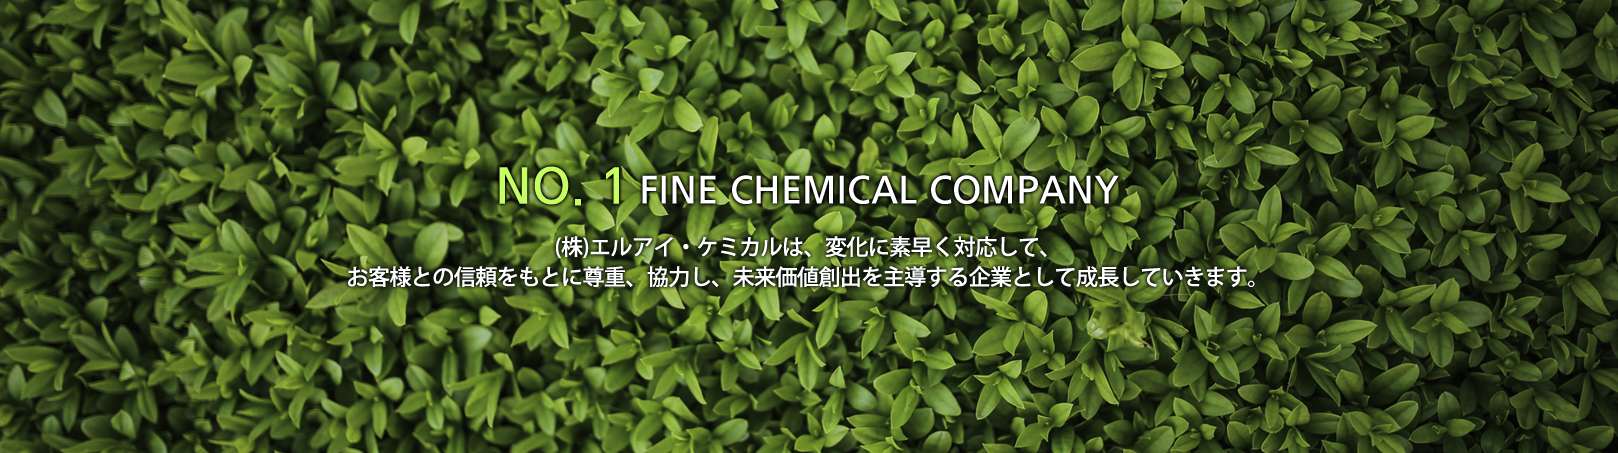 NO. 1 FINE CHEMICAL COMPANY - LI Chemical will be a leader in creating future values by respecting and cooperating with each other on the basis of reliability for customers and quick reaction to changes in the industry. 